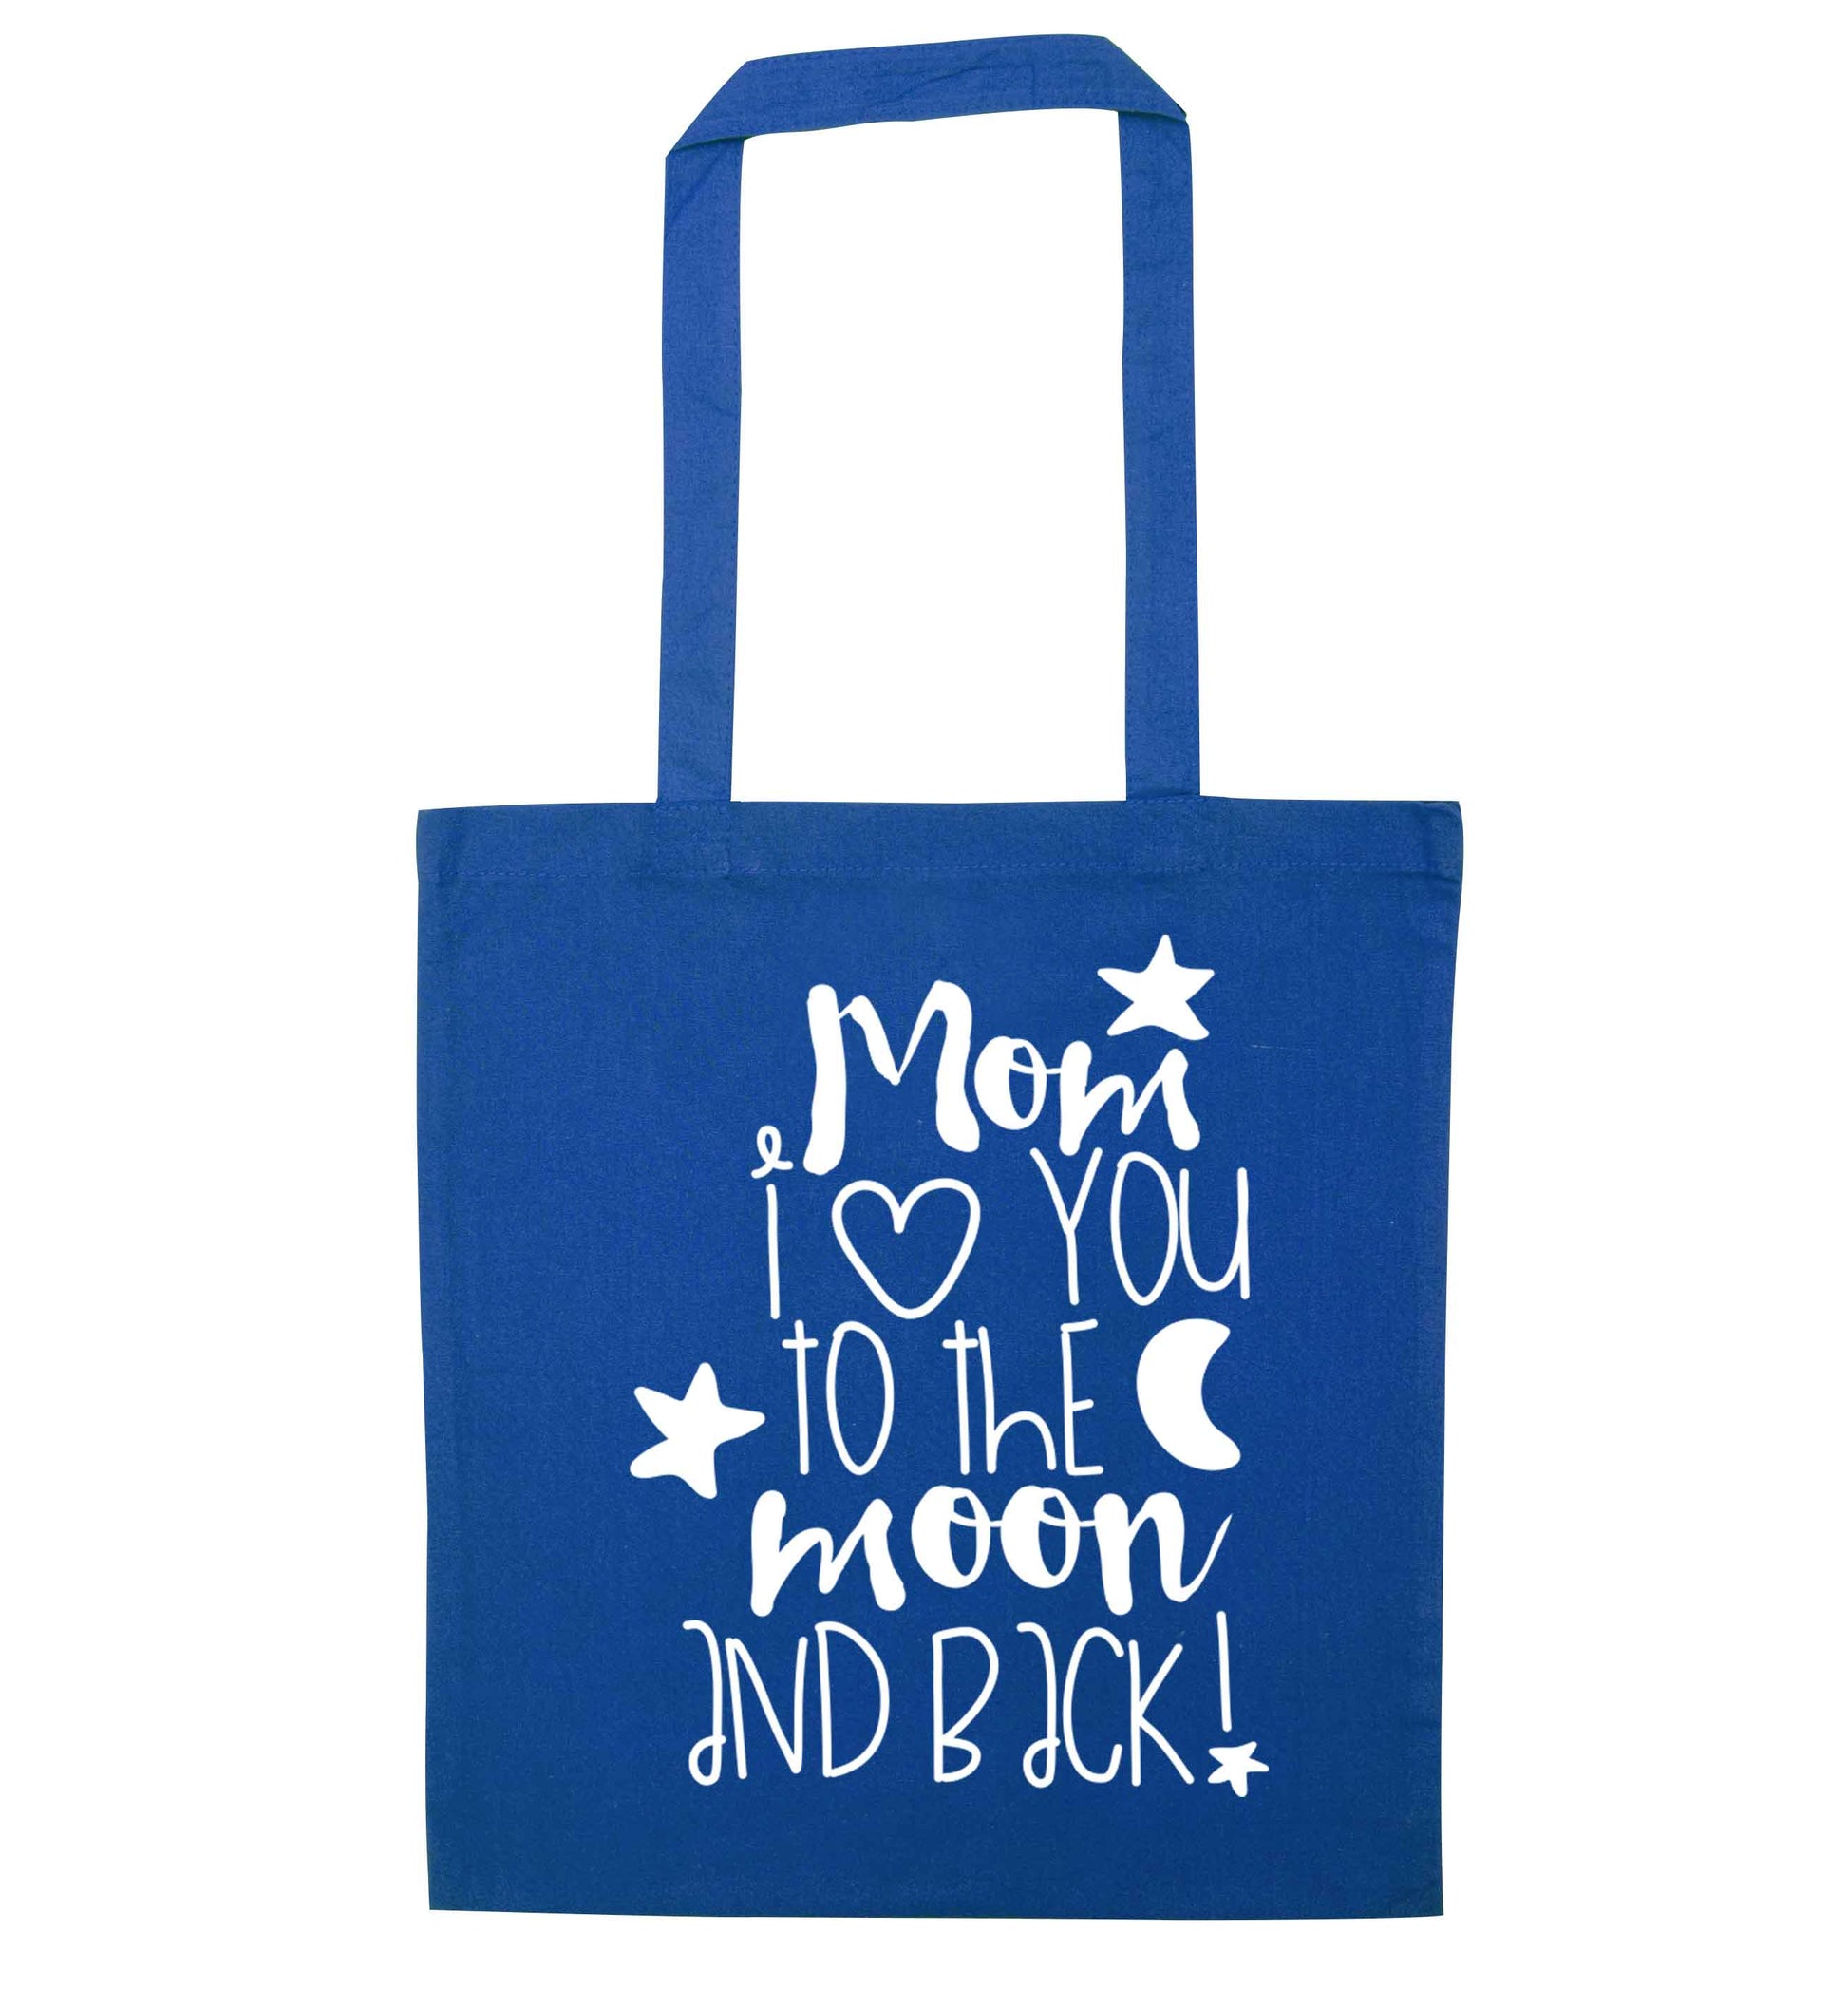 Mom I love you to the moon and back blue tote bag